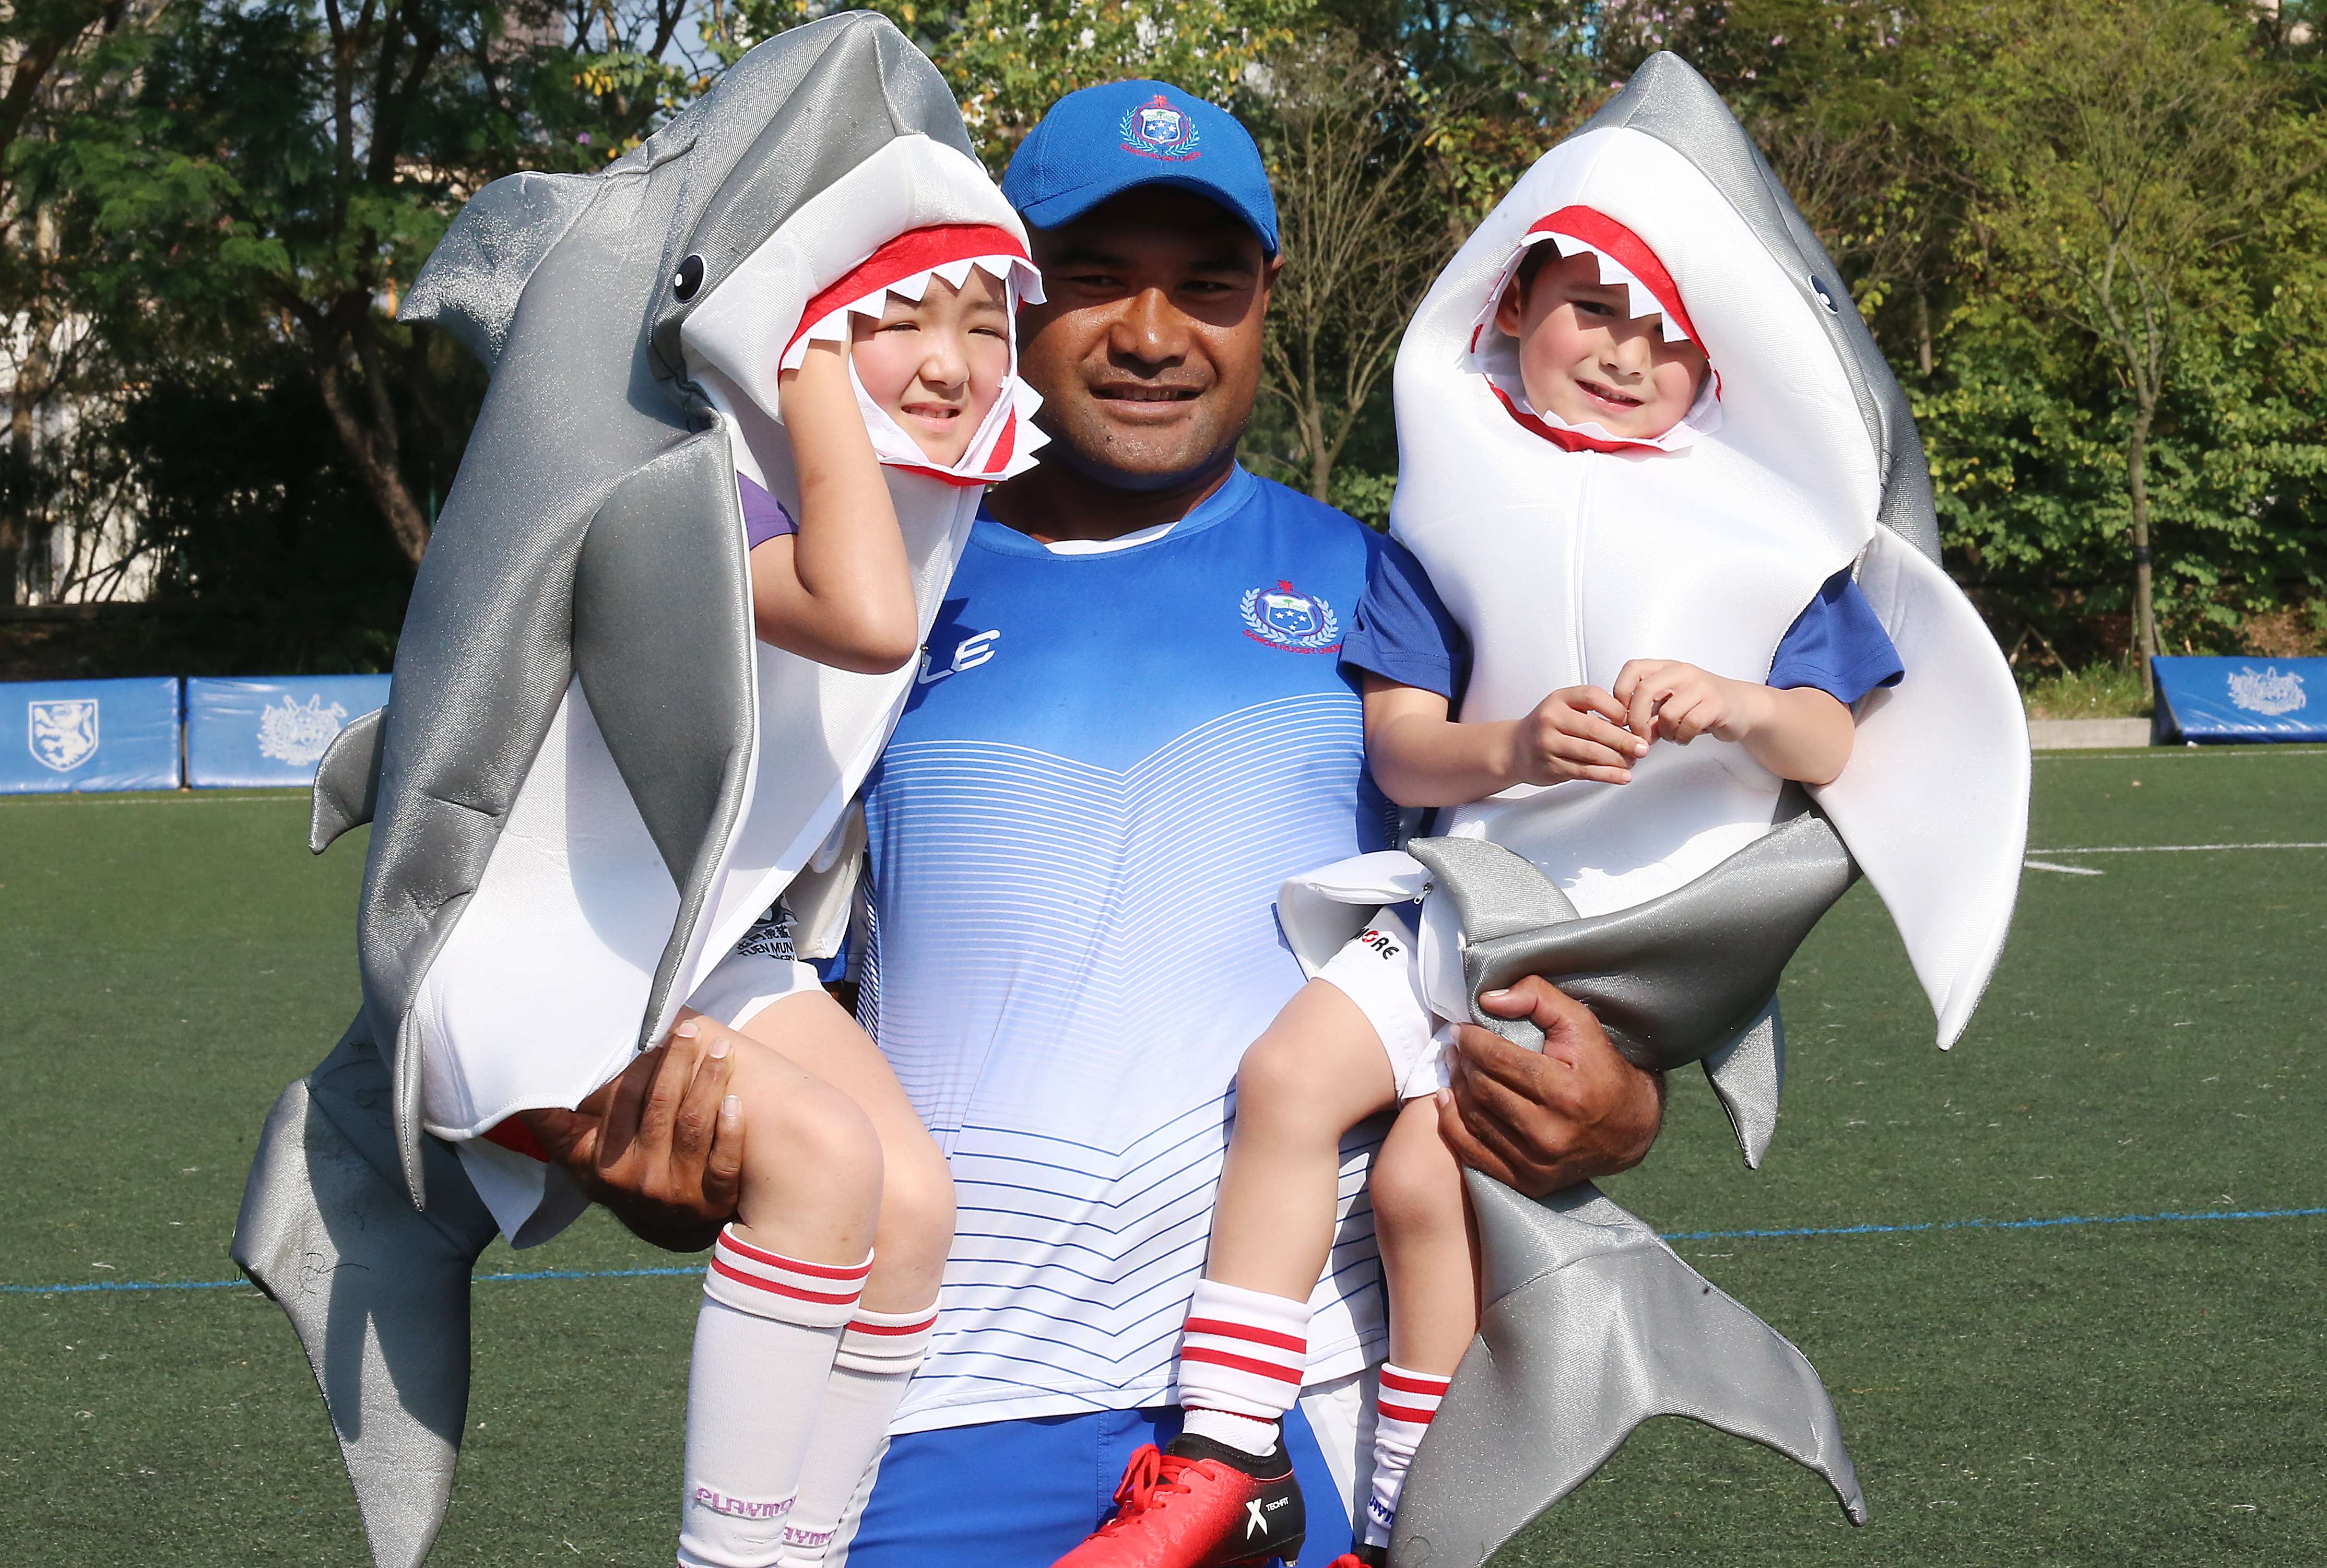 Captain Faalemiga Selesele of Samoa and kids of Tuen Mun Sharks mini rugby club dress up as sharks to raise awareness of shark conservation. Photo: K. Y. Cheng